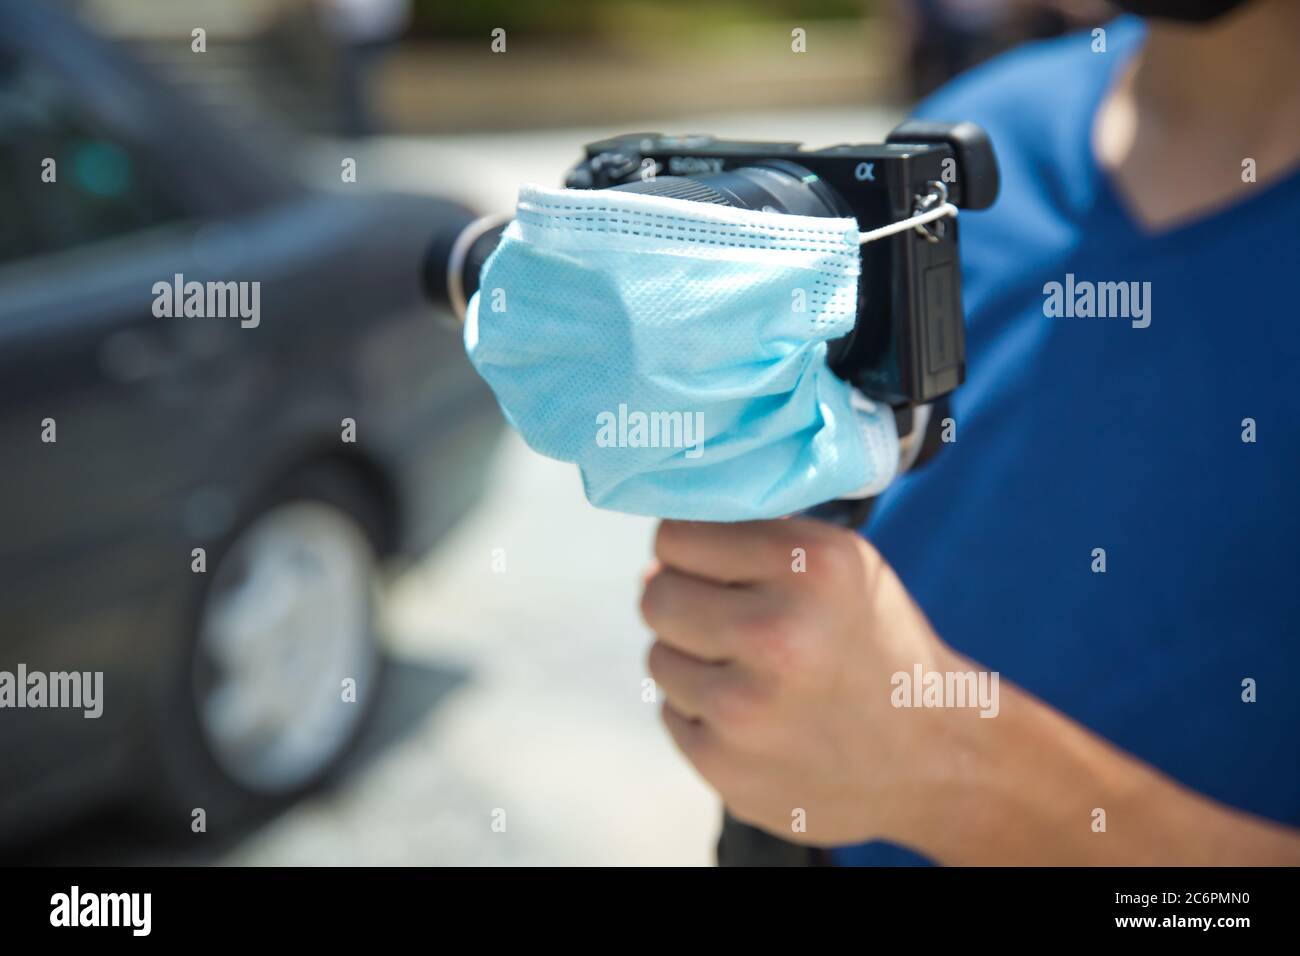 Azerbaijan Baku : 26.06.2020 . Man holding gimbal stabilizer camera outdoor. A blue mask is attached to the camera lens. The camera is protected by CO Stock Photo